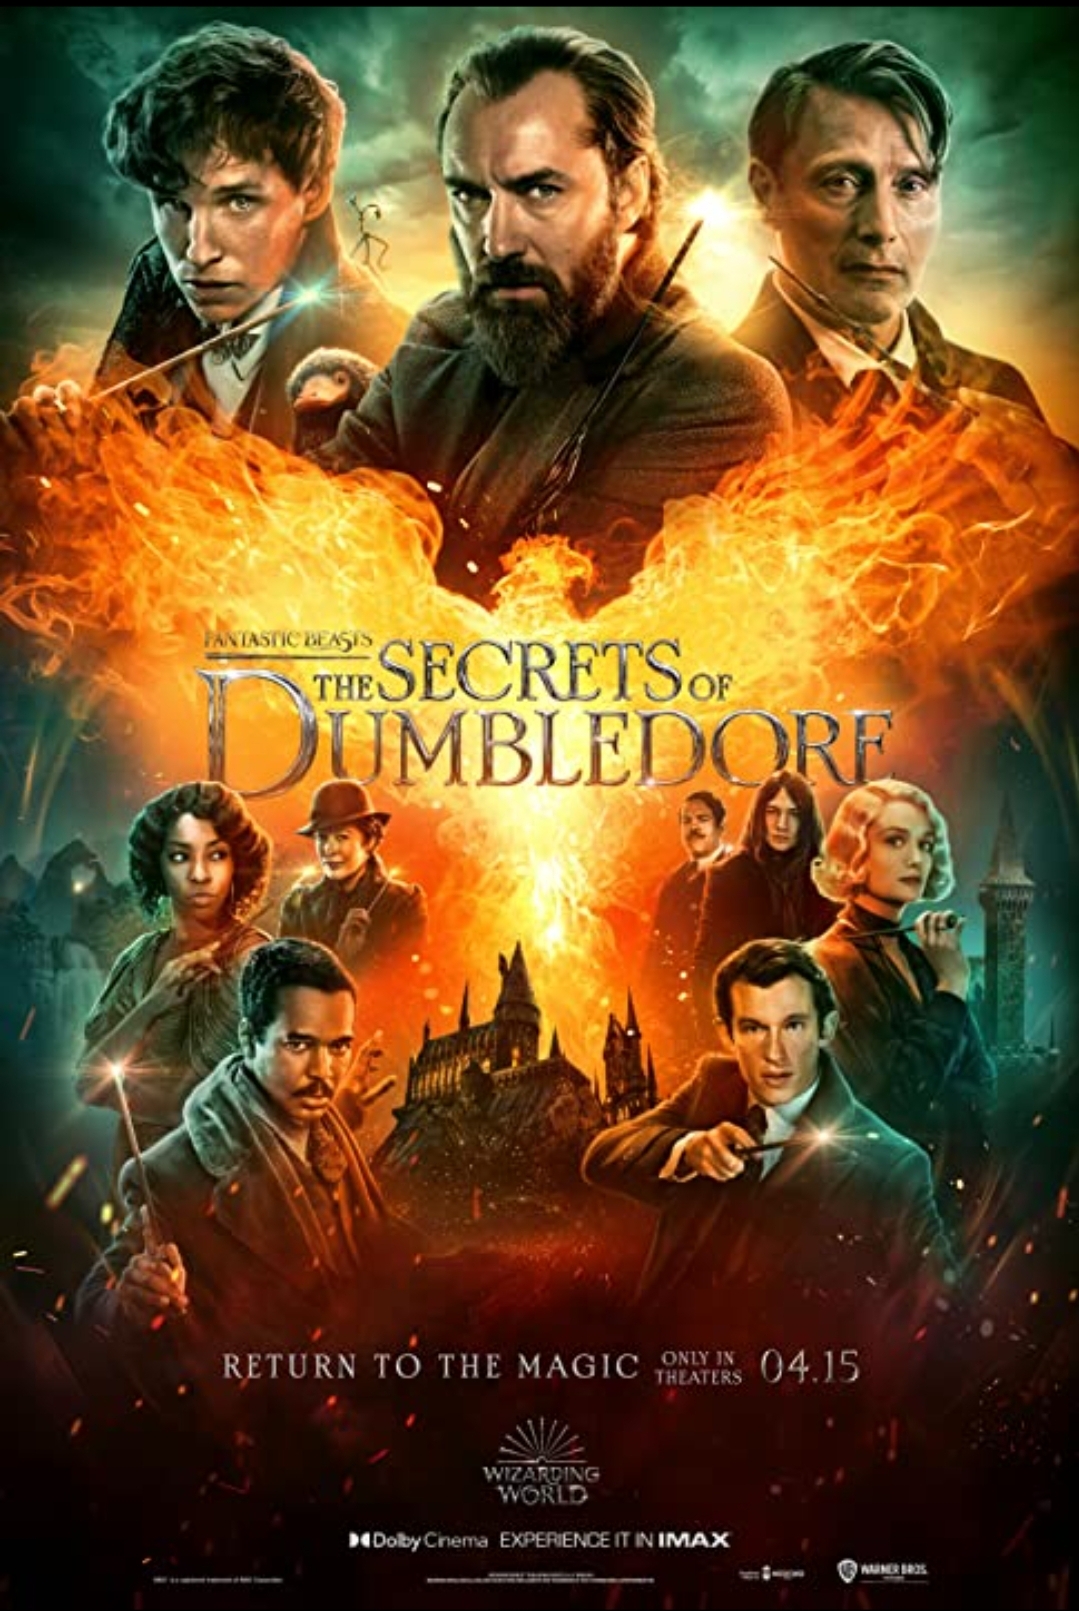 FoF to host the Dallas, Houston, Austin premiere of Fantastic Beasts The Secrets of Dumbledorf